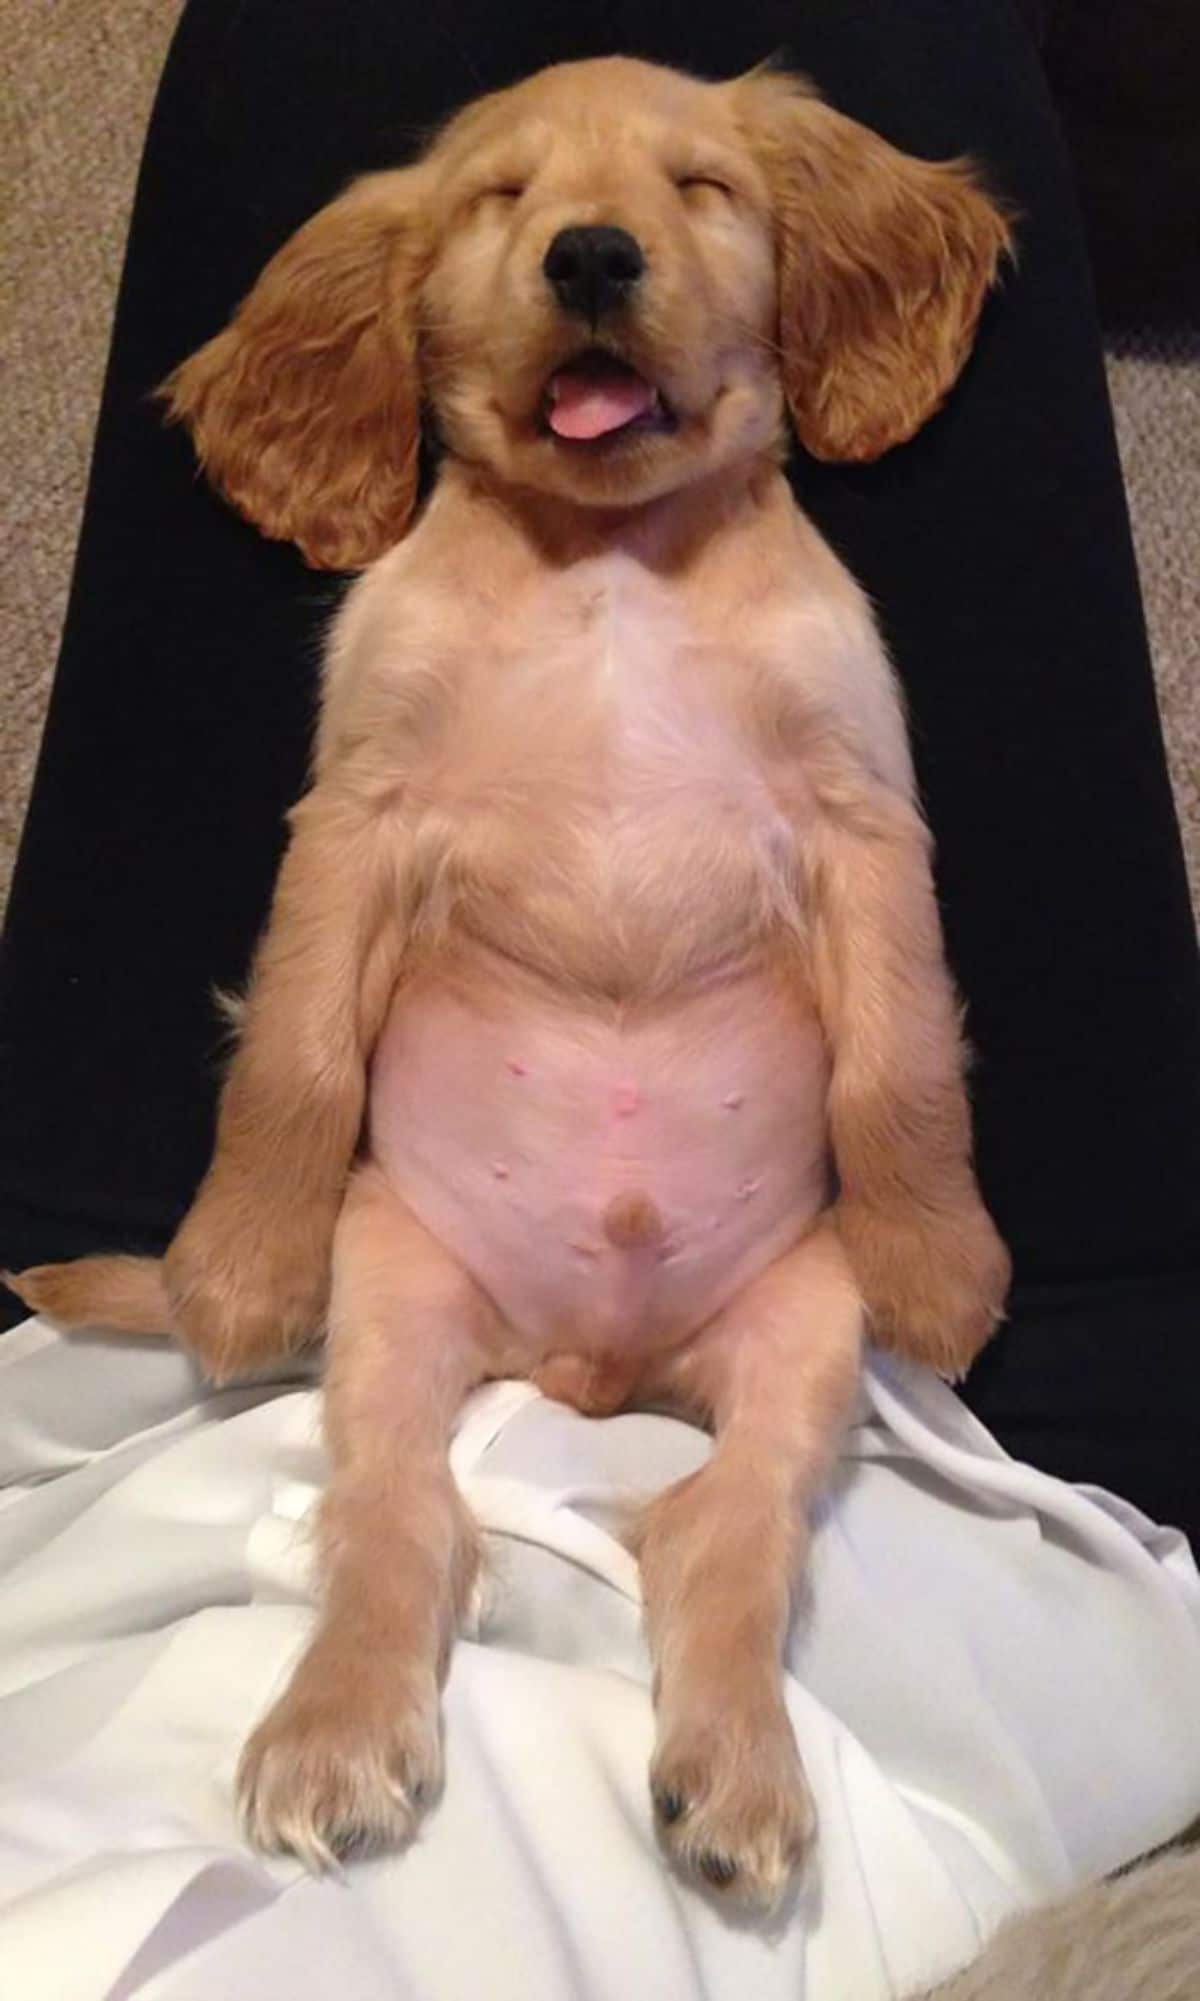 golden retriever puppy sleeping belly up on someone's lap with the mouth open and tongue out